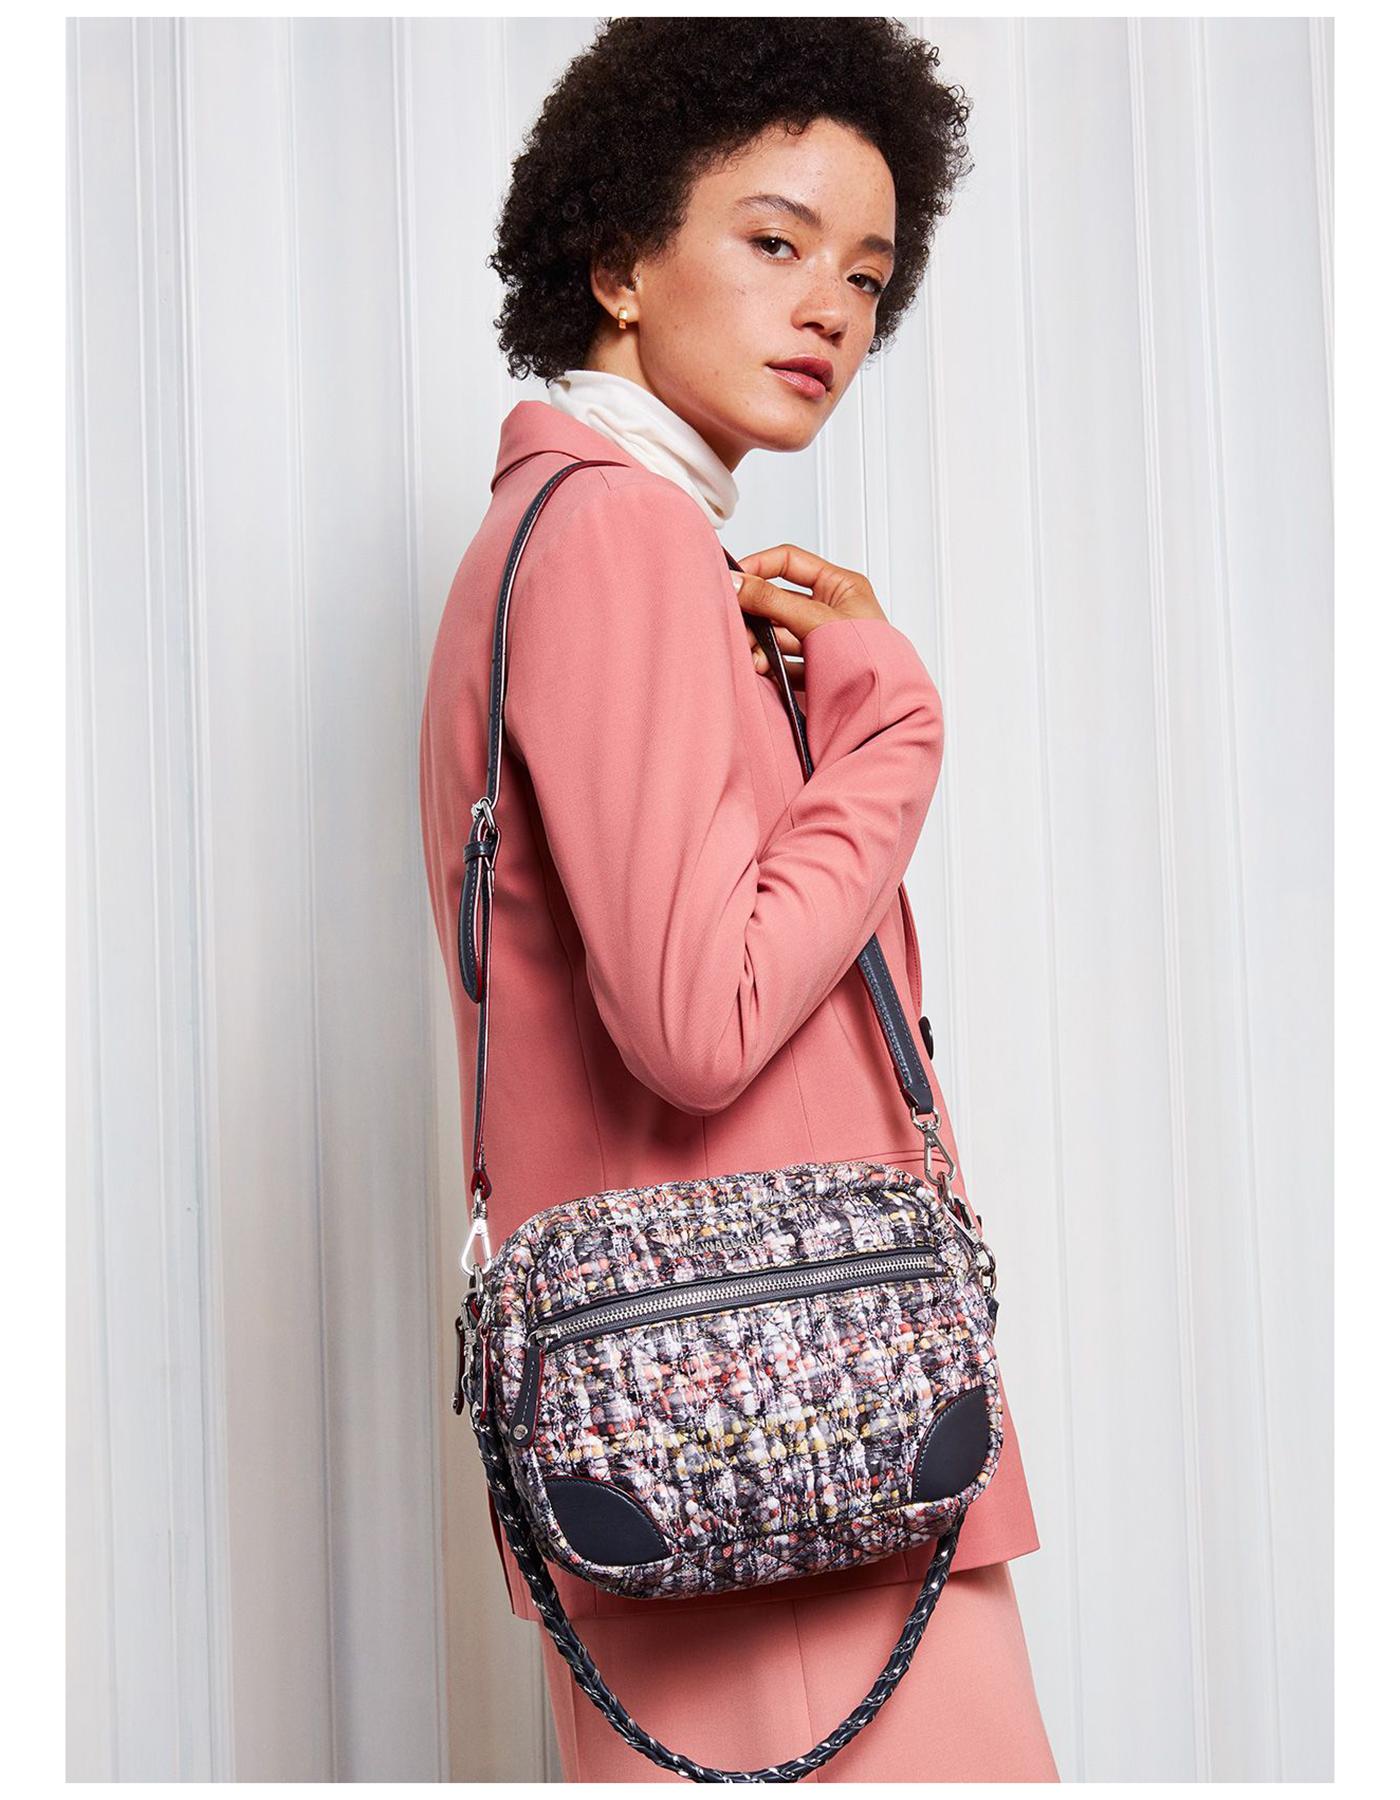 MZ Wallace Boucle Print Nylon Small Crosby Camera Crossbody Bag.  Features three detachable straps.  One silvertone and grey leather chain link shoulder strap, one grey leather adjustable crossbody strap, and one canvas adjustable crossbody